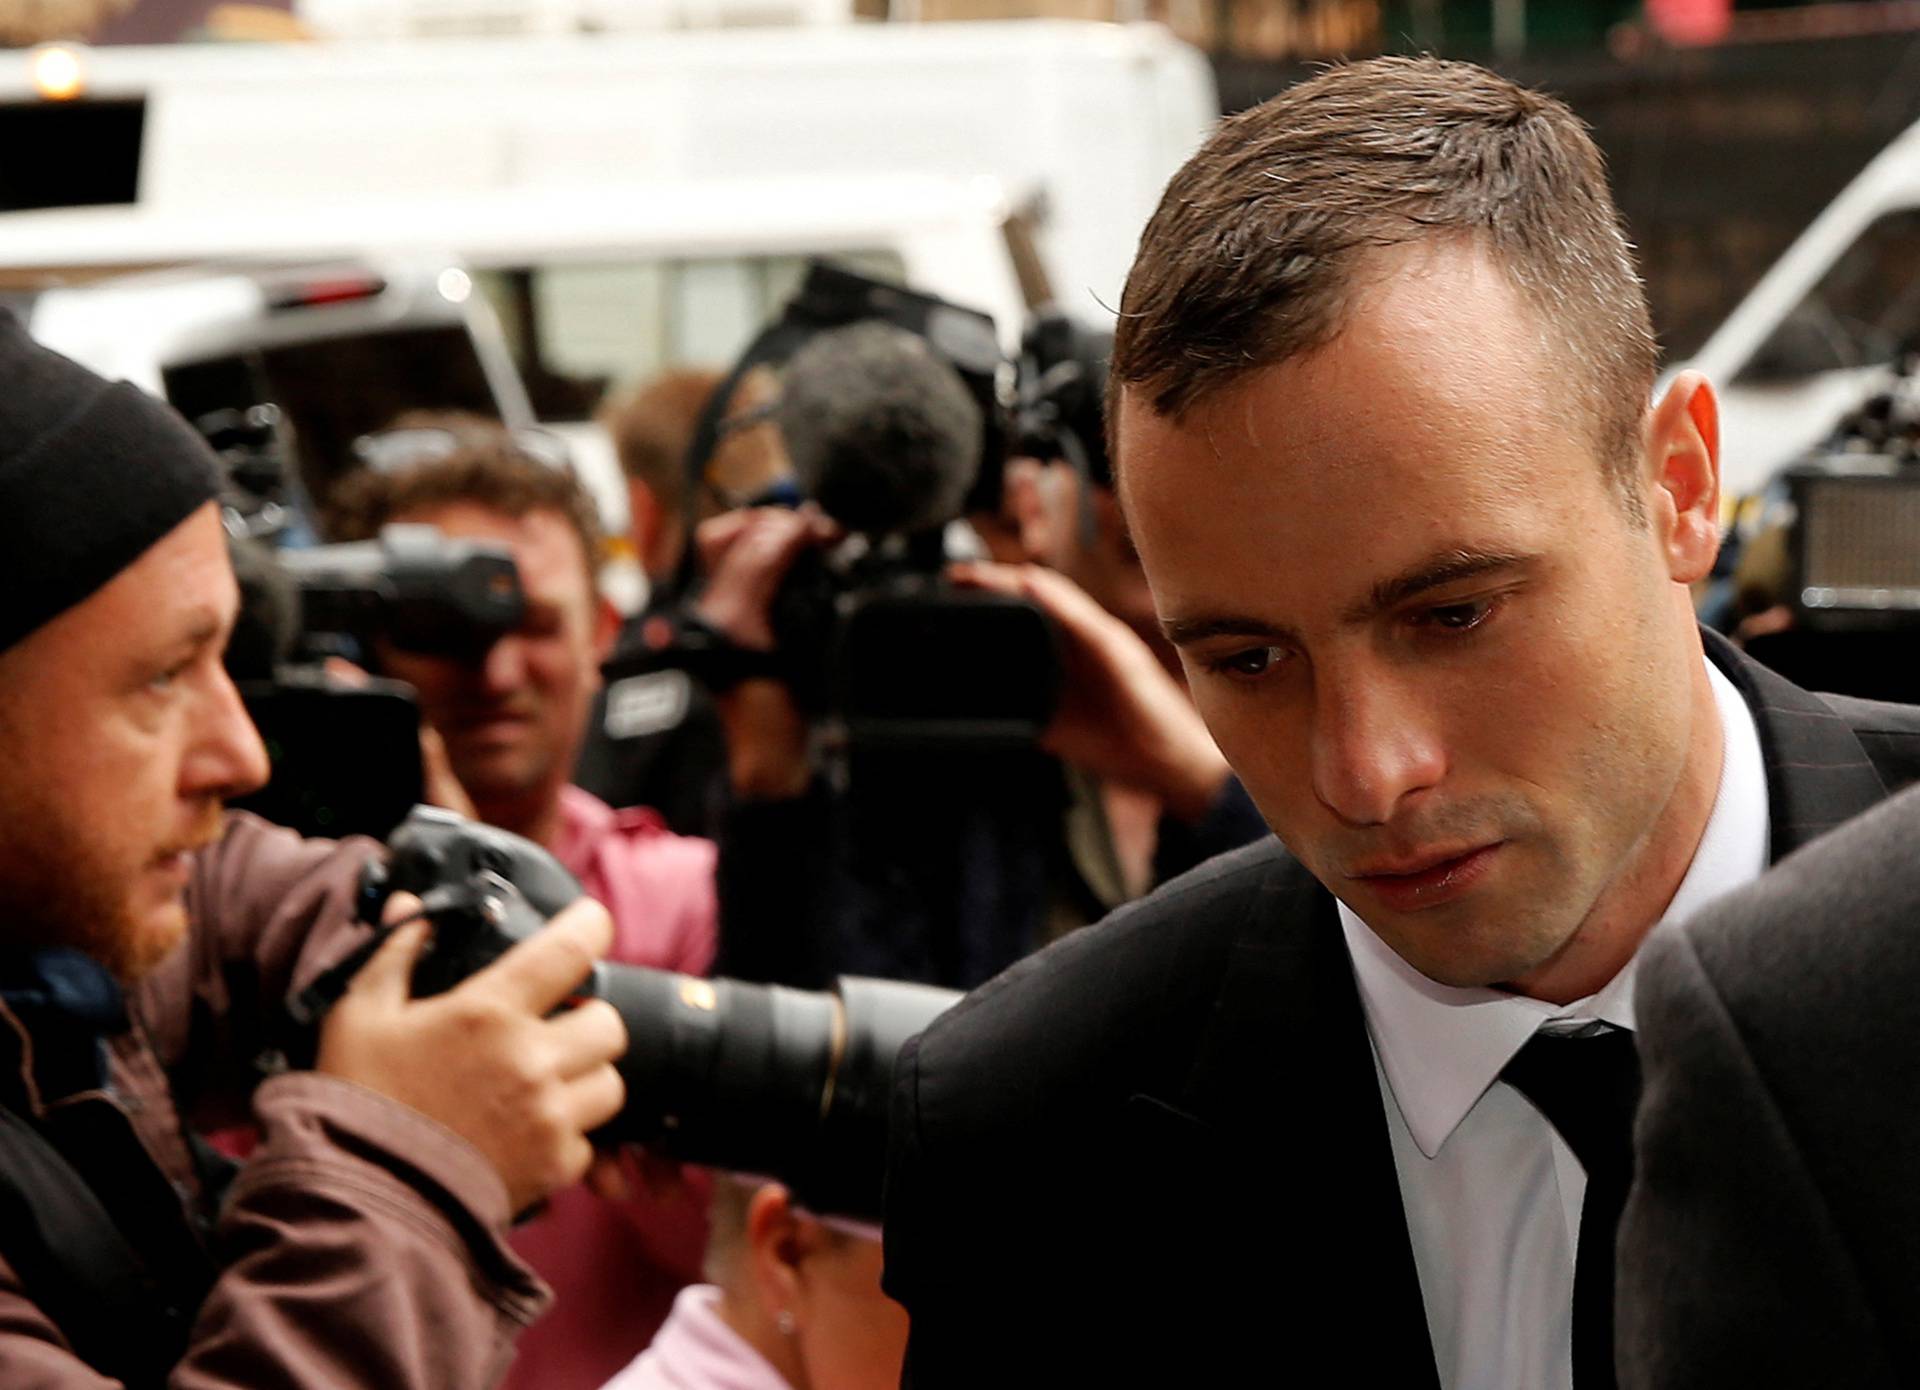 FILE PHOTO: Olympic and Paralympic track star Pistorius arrives ahead of his trial for the murder of his girlfriend Steenkamp, at the North Gauteng High Court in Pretoria